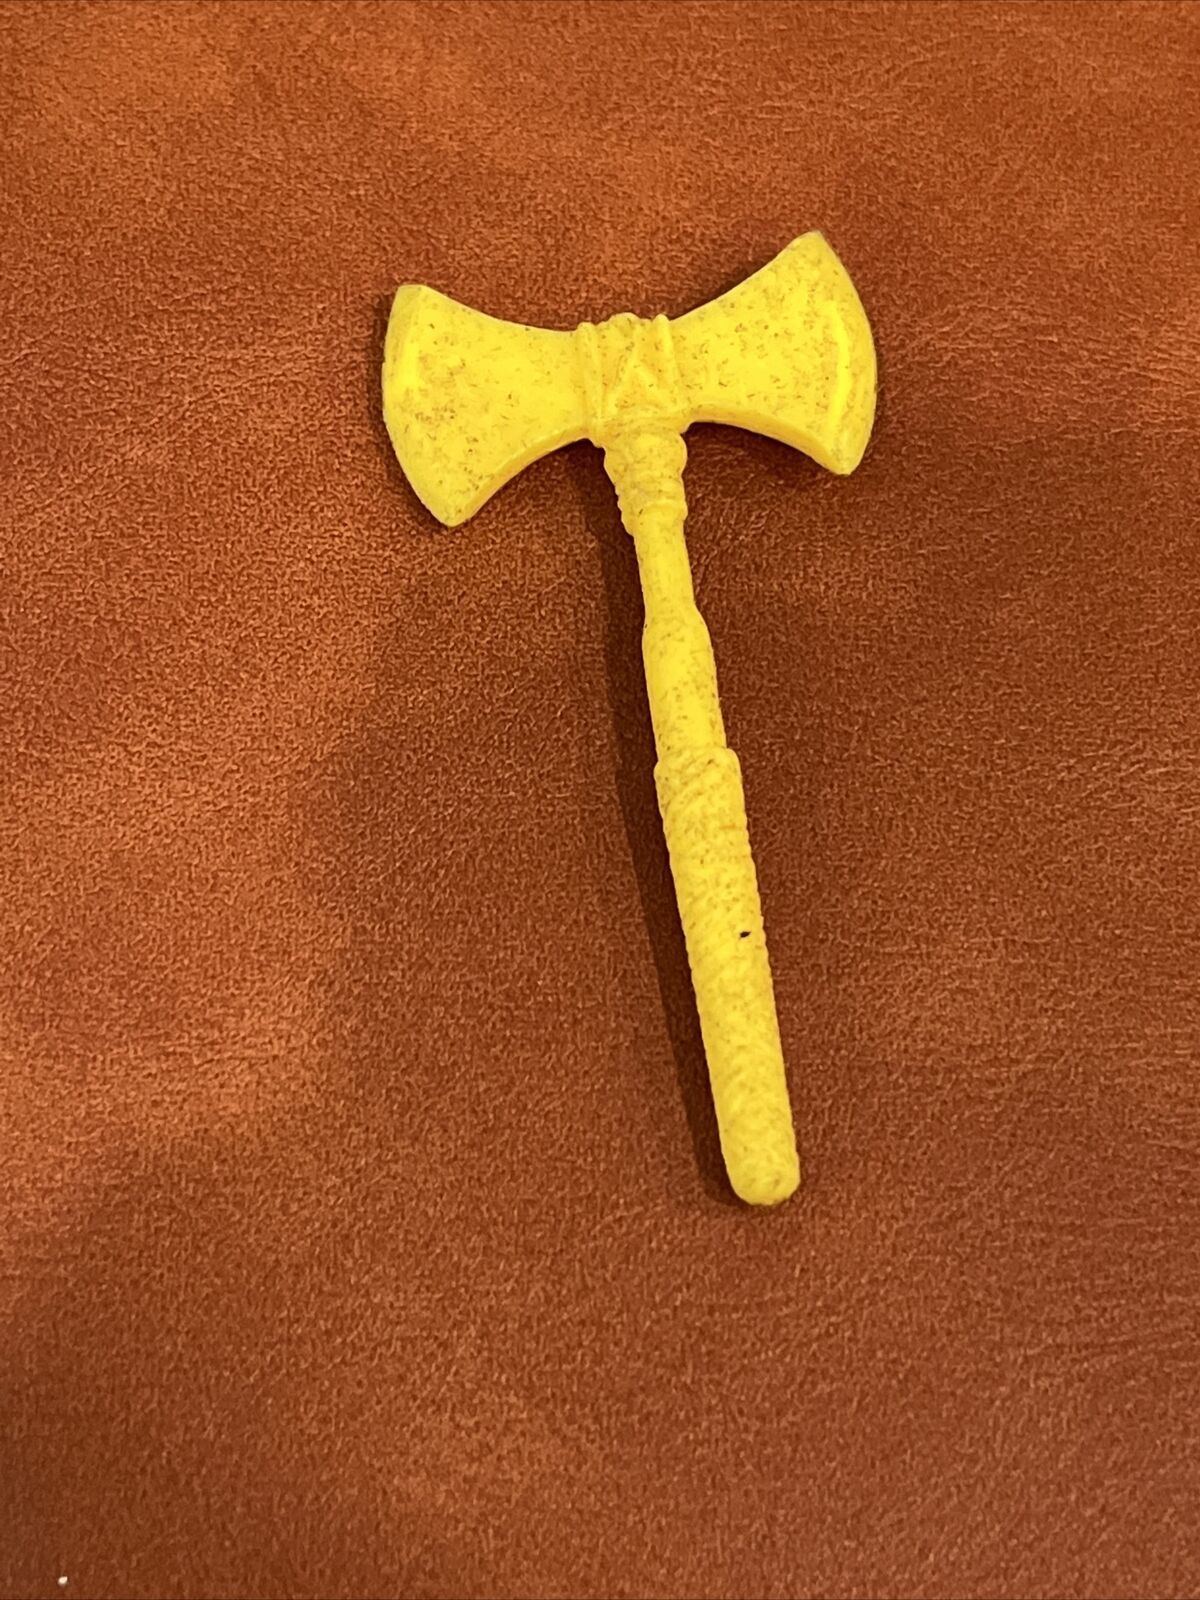 Primary image for Vintage Battle Trolls Weapon Ax Accessory